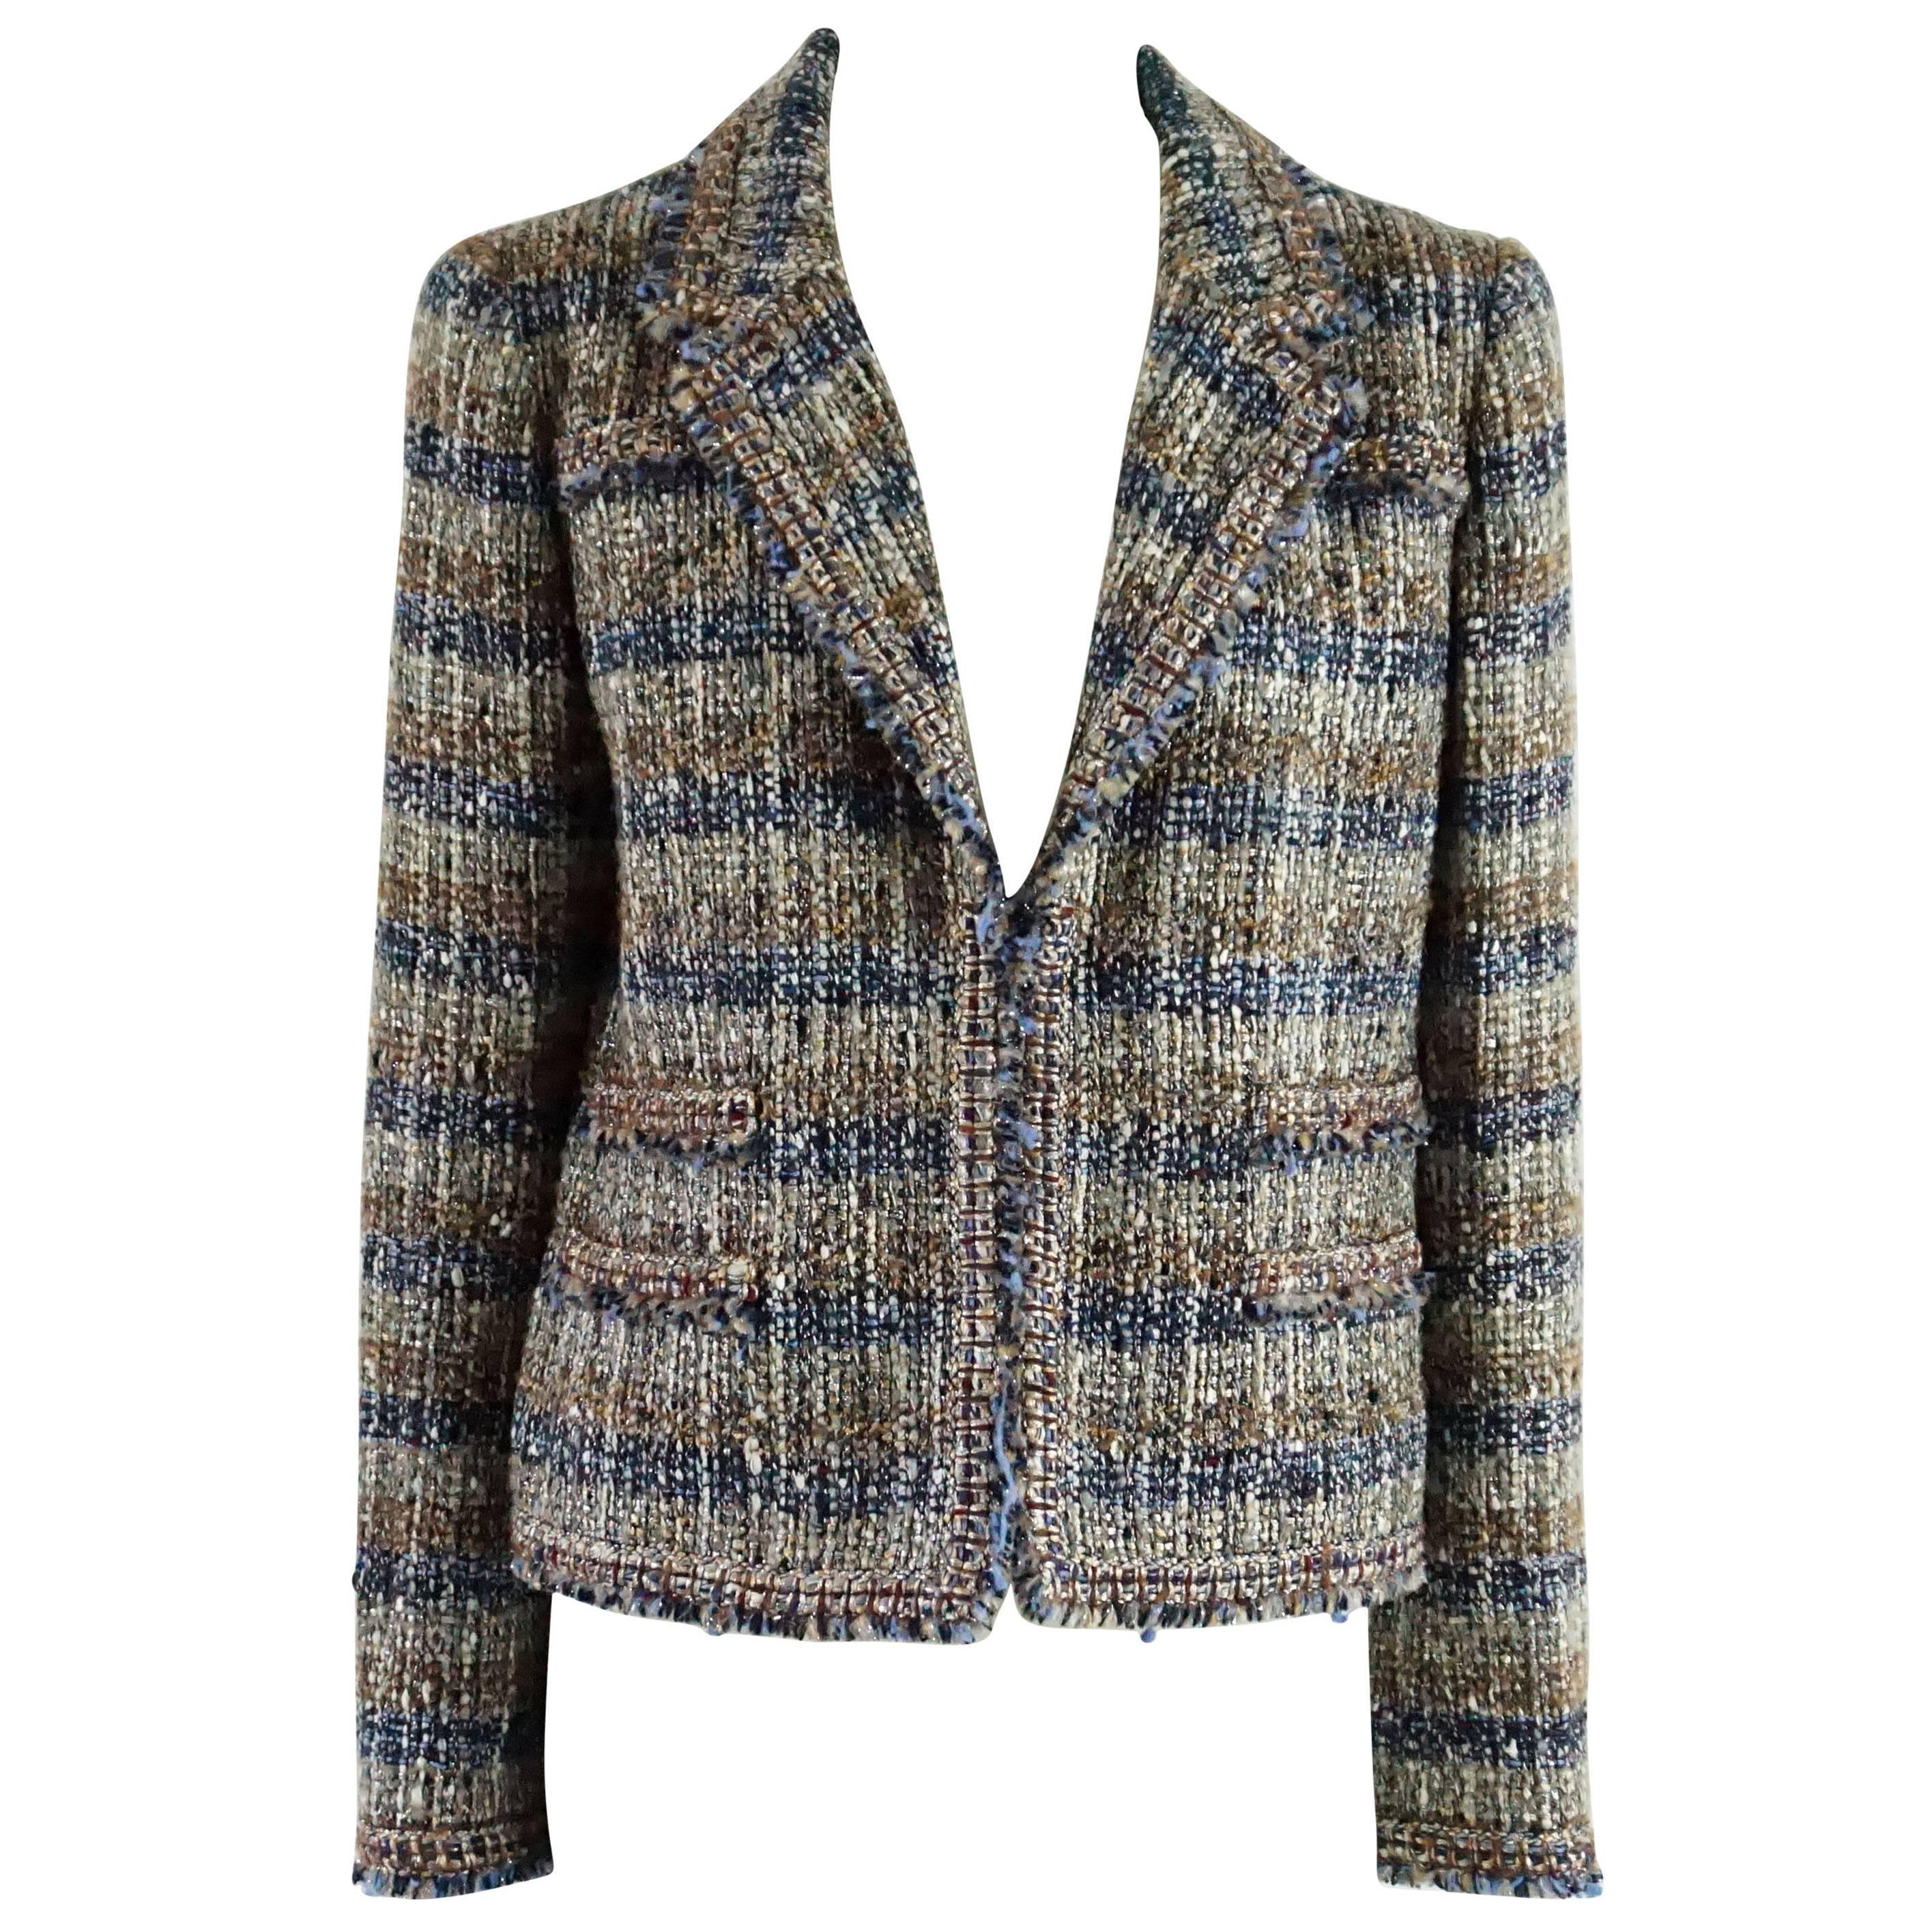 Chanel Metallic Multi-Color Tweed Jacket with Silver Buttons - 42 - 04A